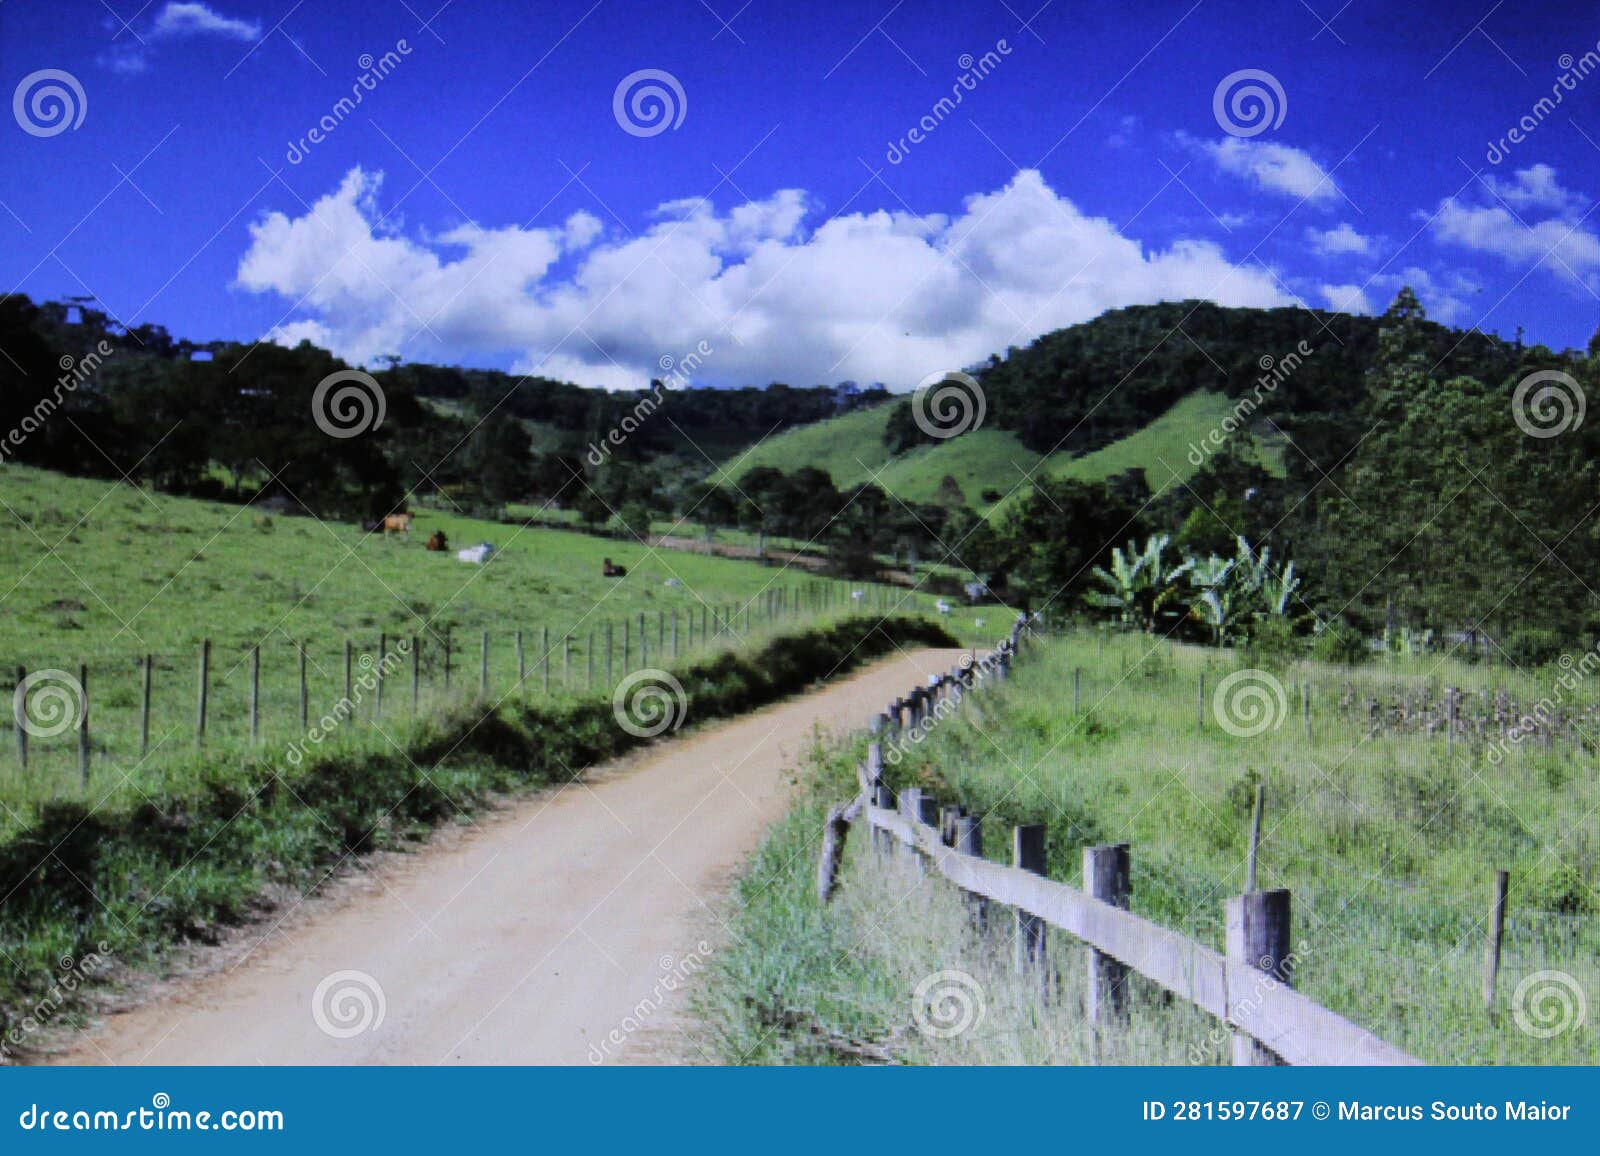 dirt road that cuts through two pastures in the rural area of a small town